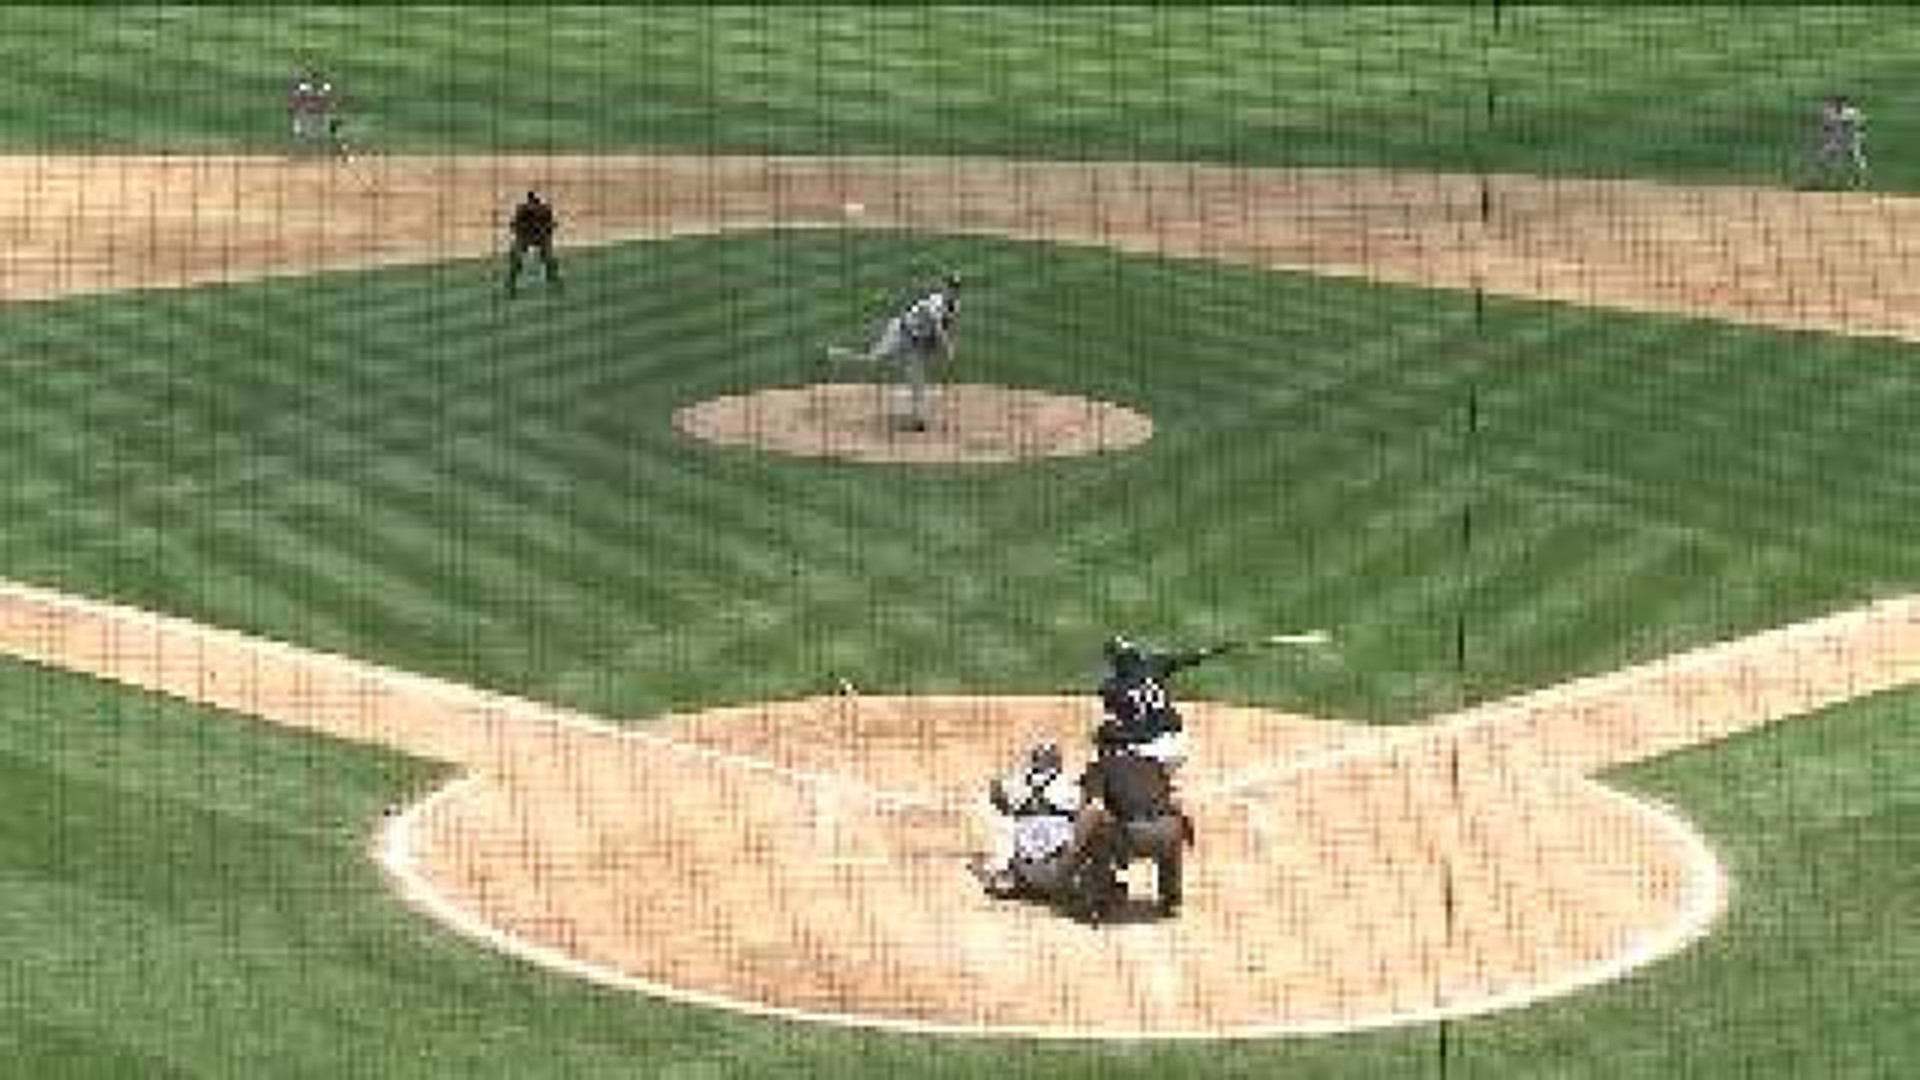 RailRiders looking for some improvement